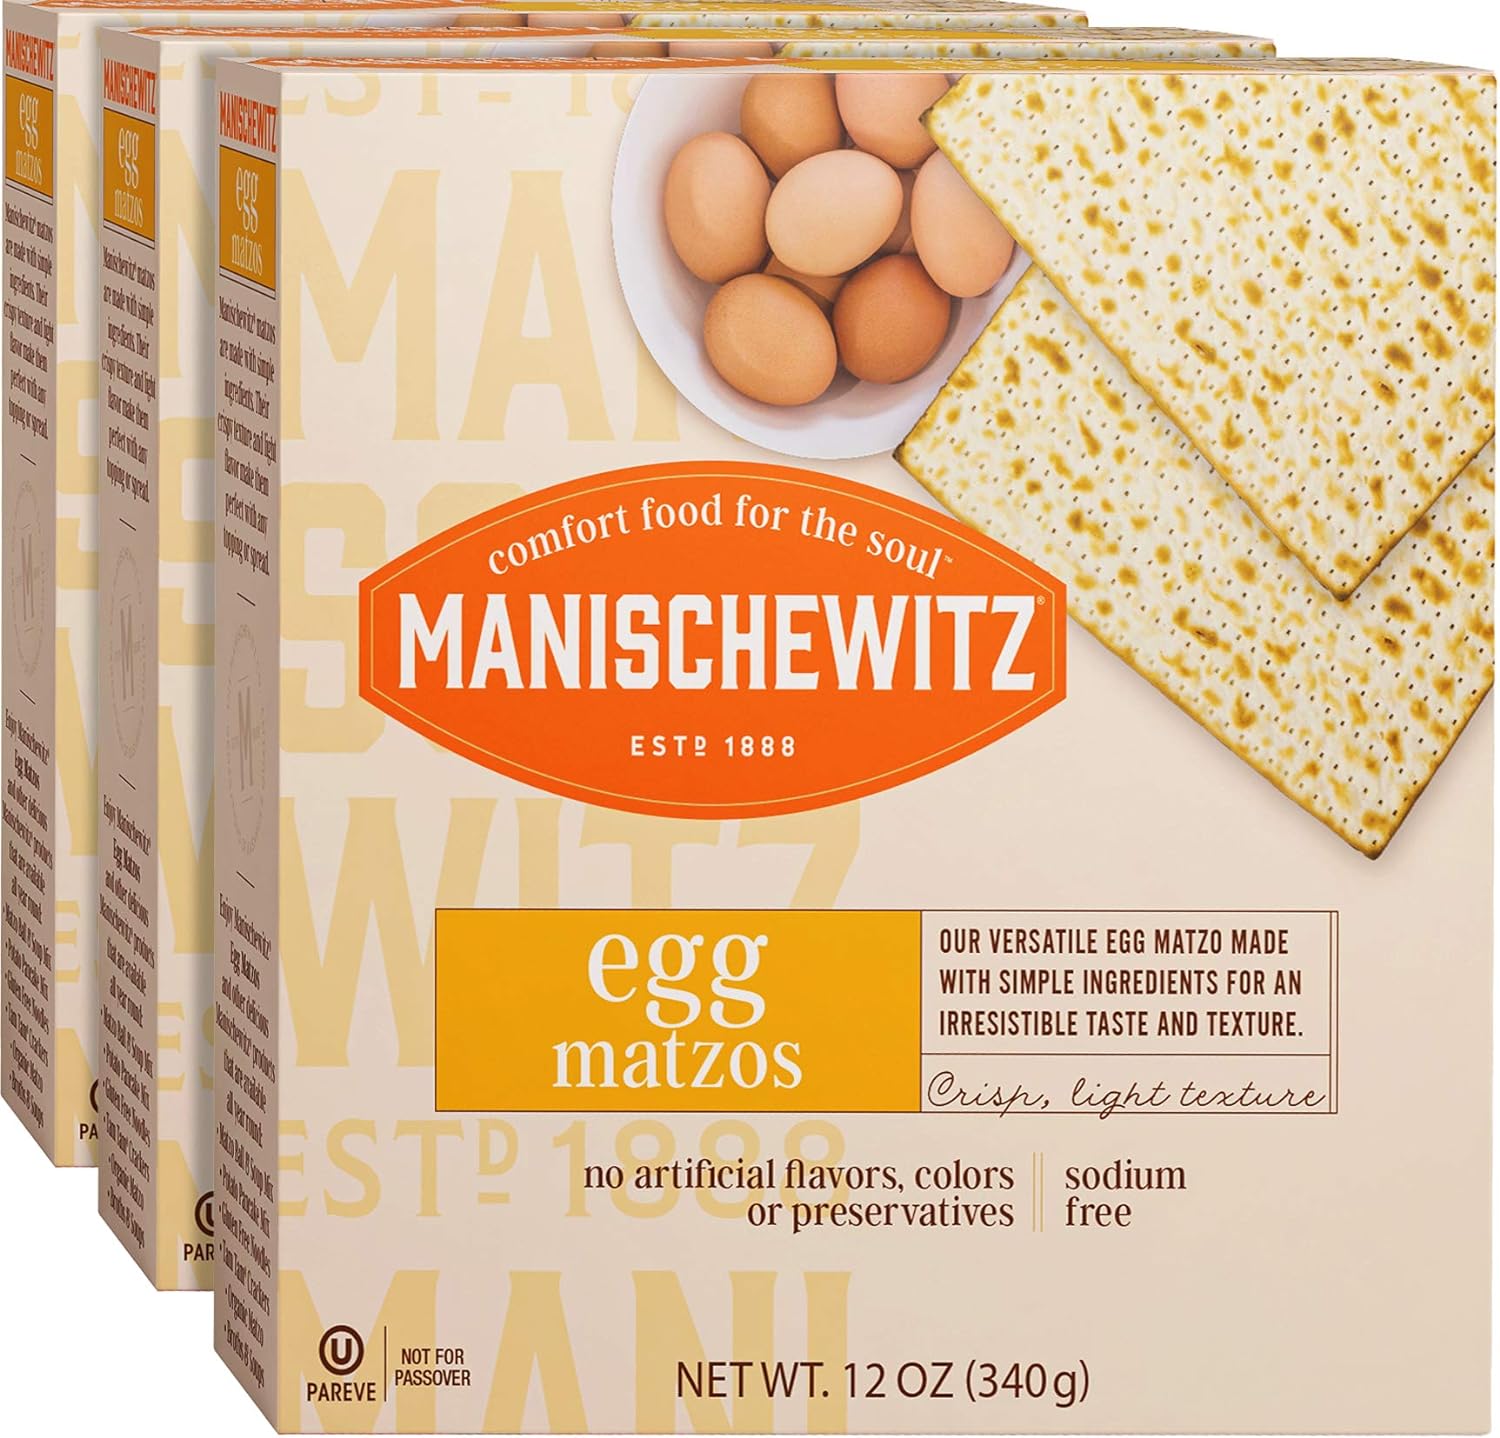 Manishewitz Egg Matzo 12oz (3 Pack) Kosher (Not For Passover), Thin, Crisp & Light Texture, Sodium Free, No Artificial Flavors, Colors or Ingredients